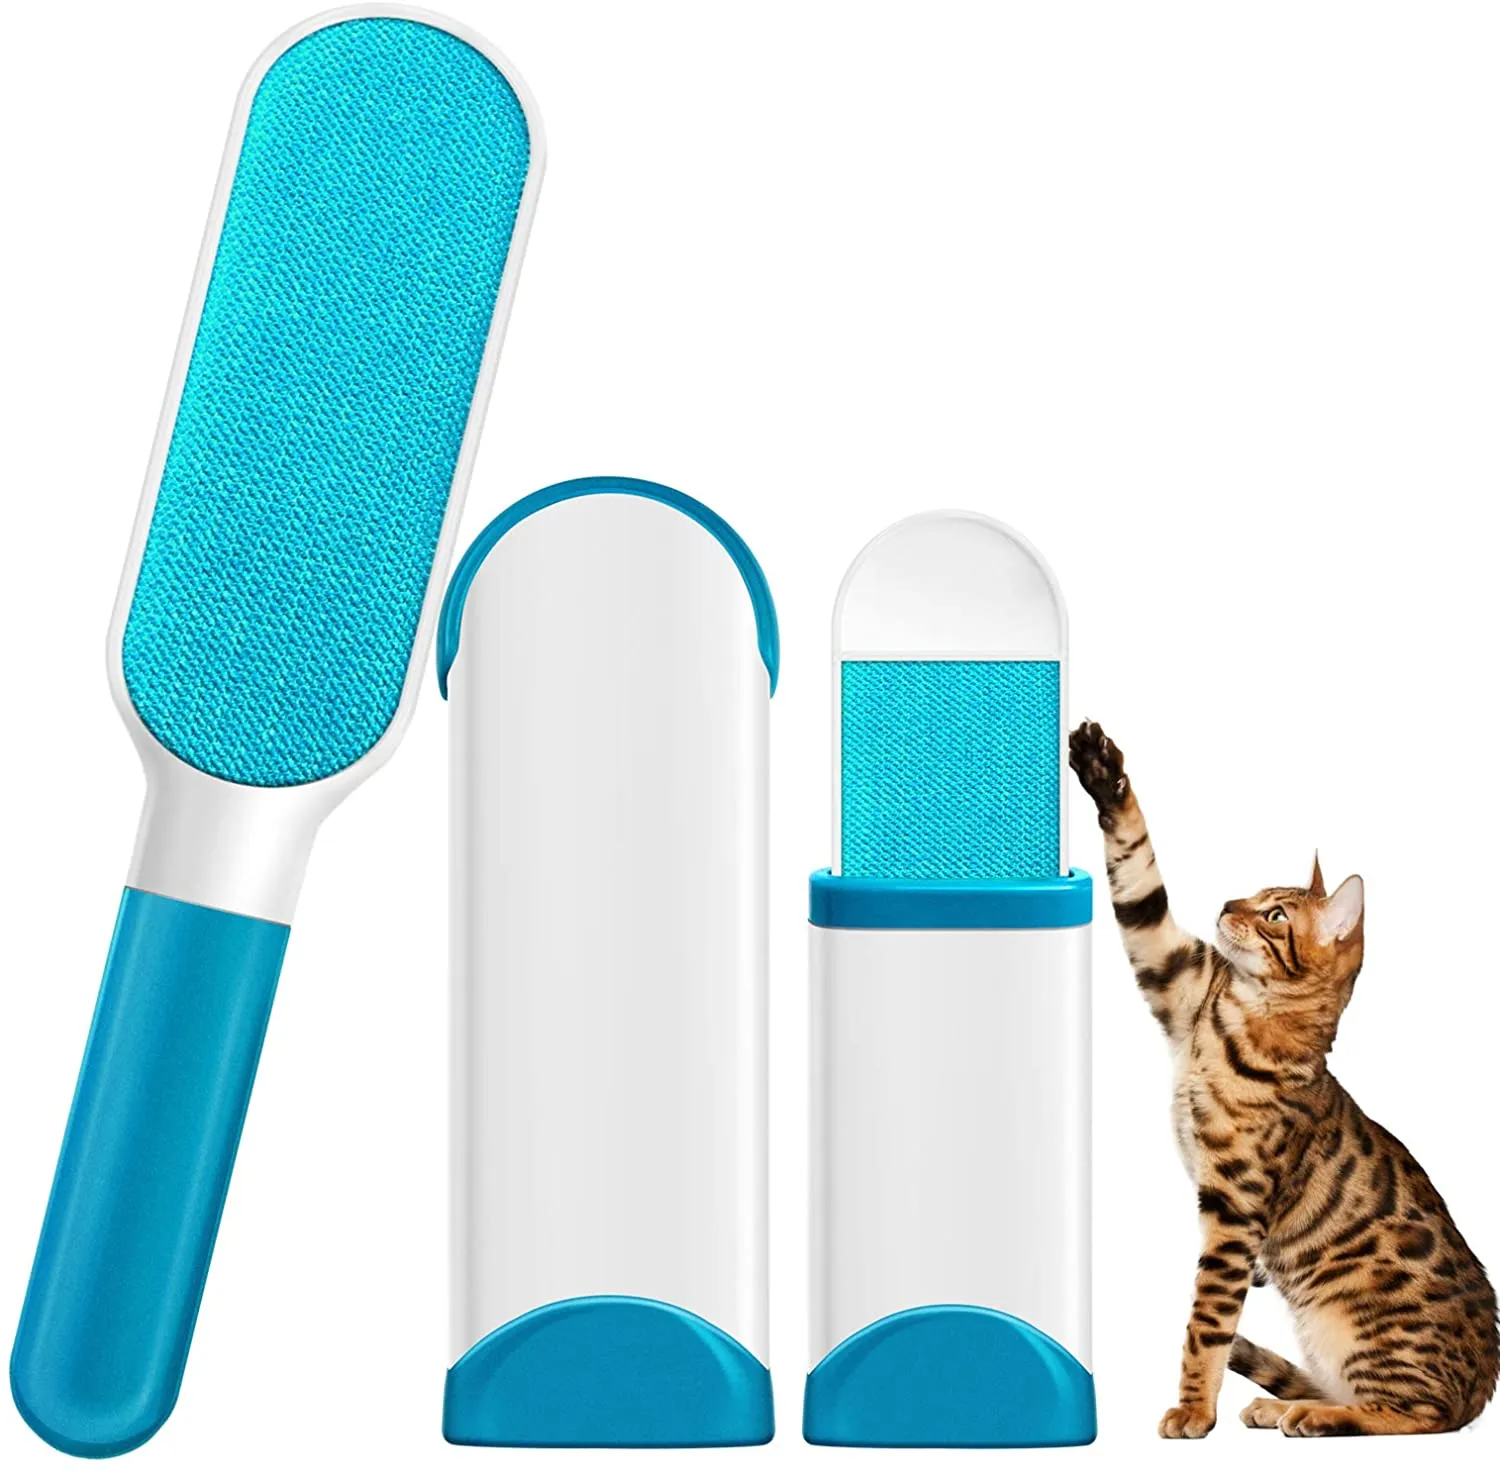 Pet Hair Remover set Pet Fur Remover Cat Hair Remover Dog Hair Remover Lint  Brush, Pet Hair Remover Brush with Self-Cleaning Base Efficient  Double-Sided Perfect for Clothing Couch Carpet Furniture Fur remover |